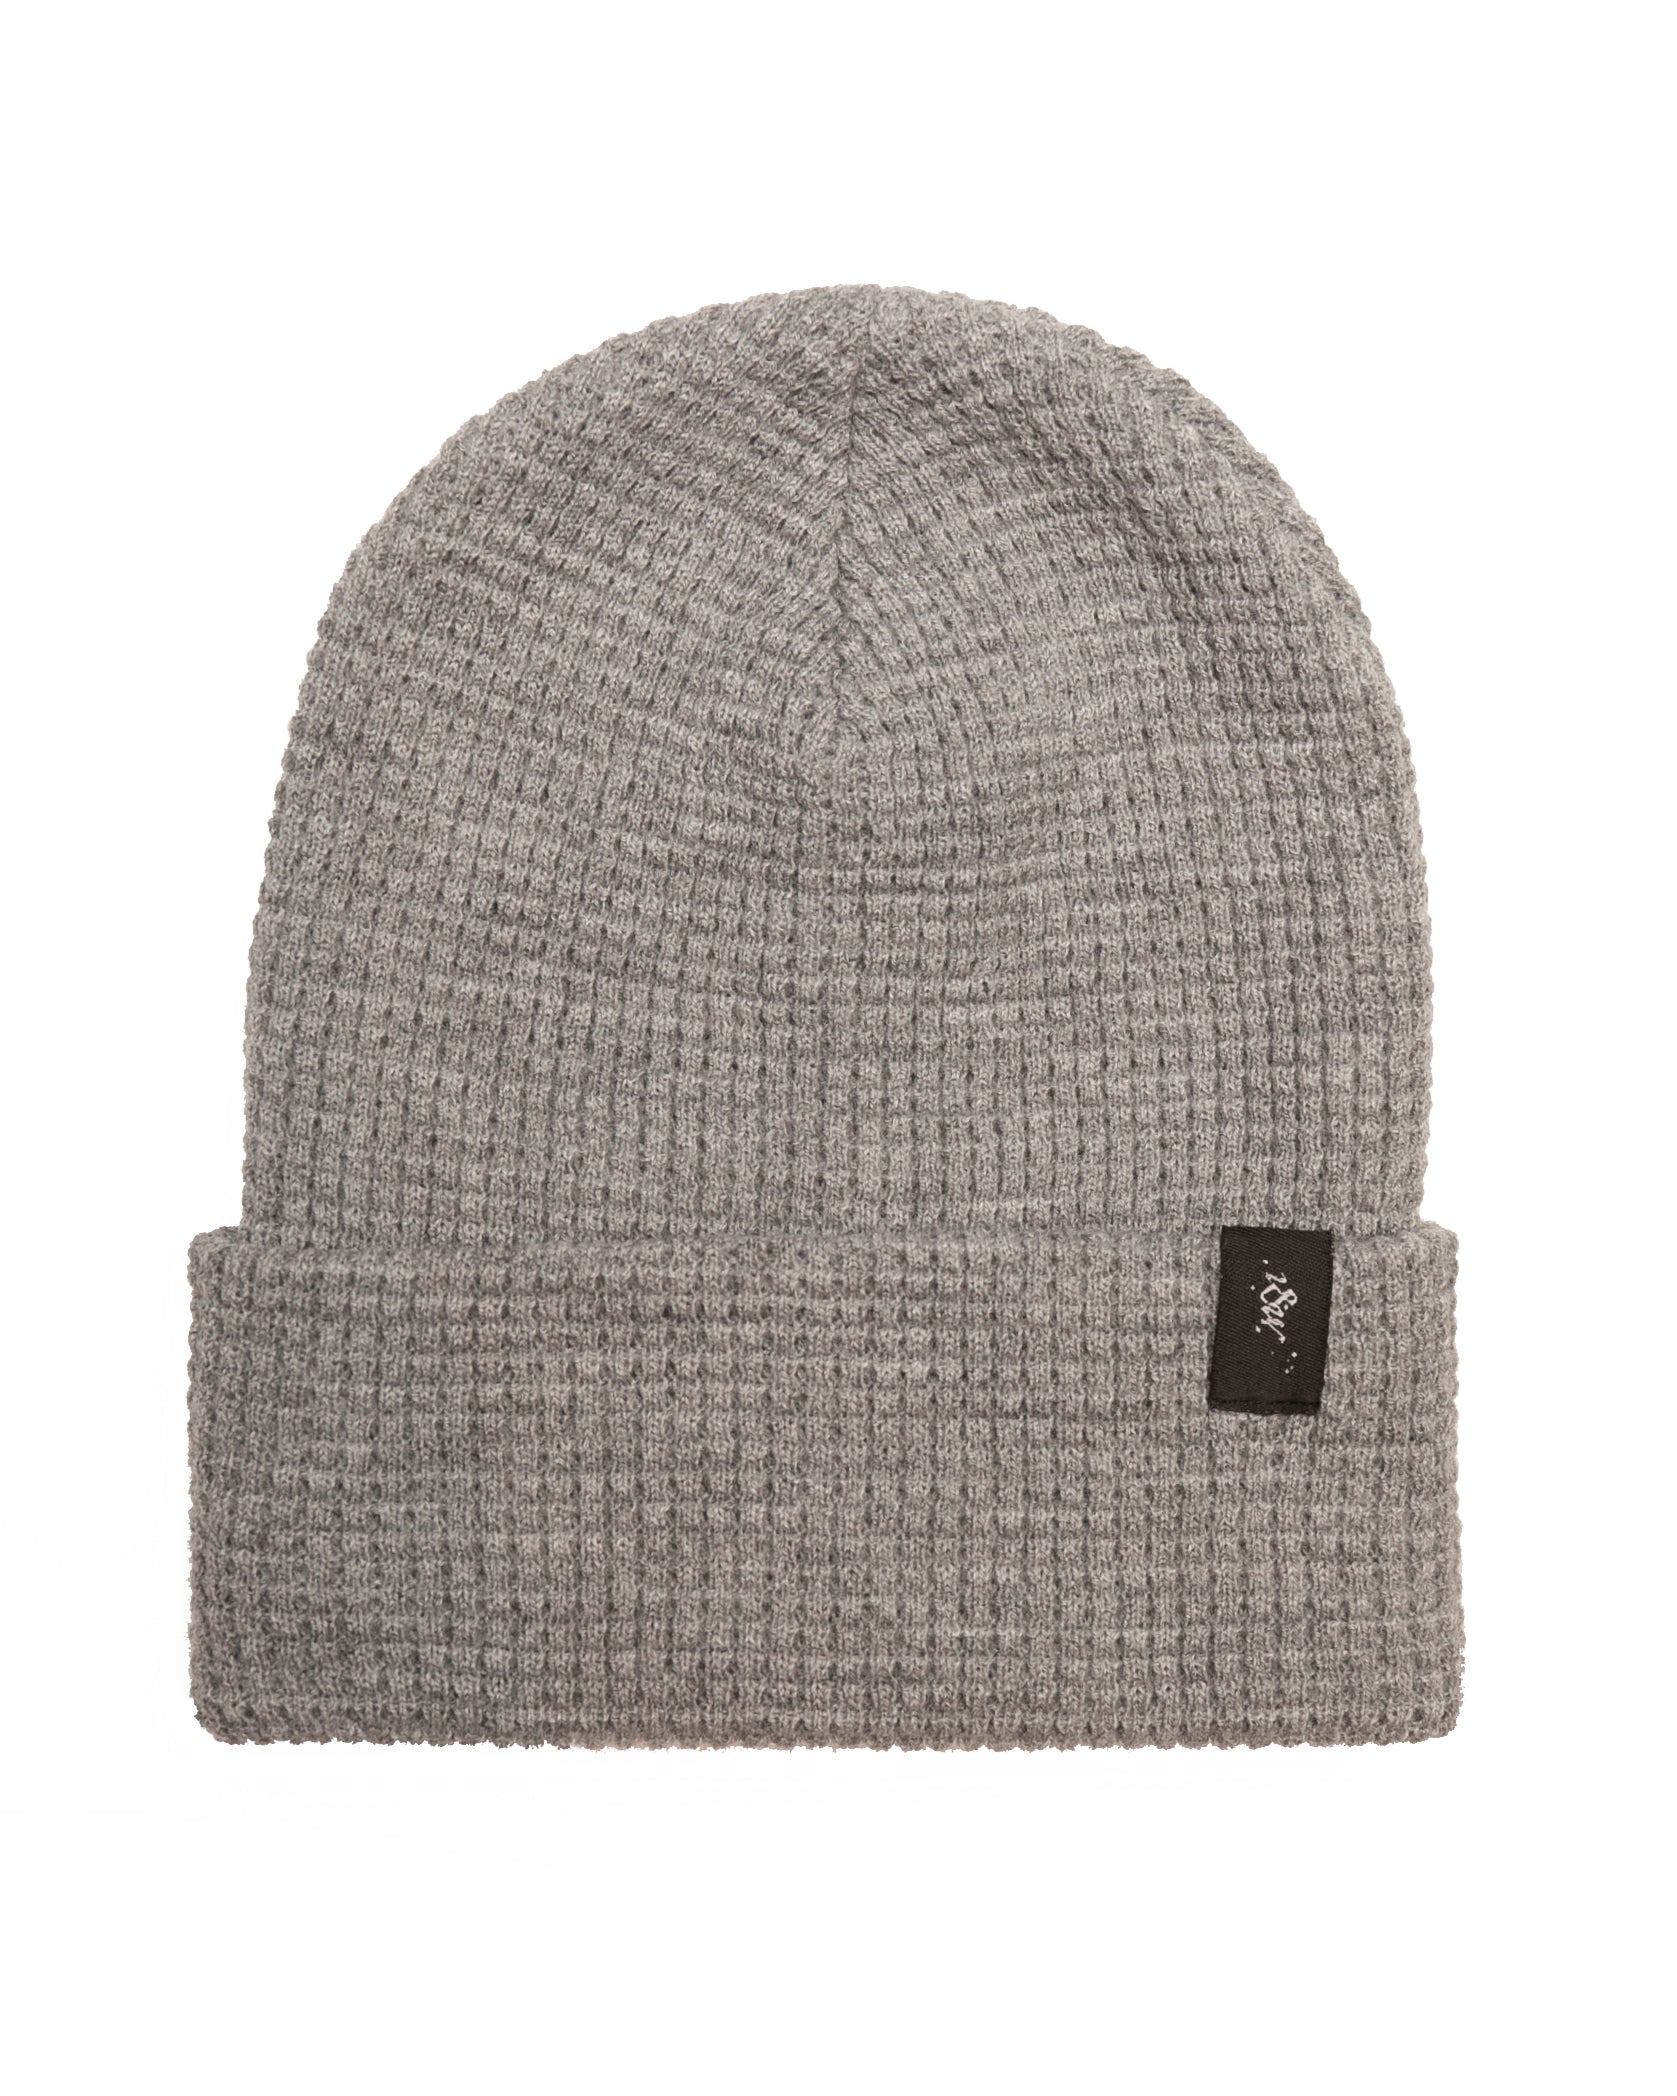 The Toque | Grey Waffle Knit